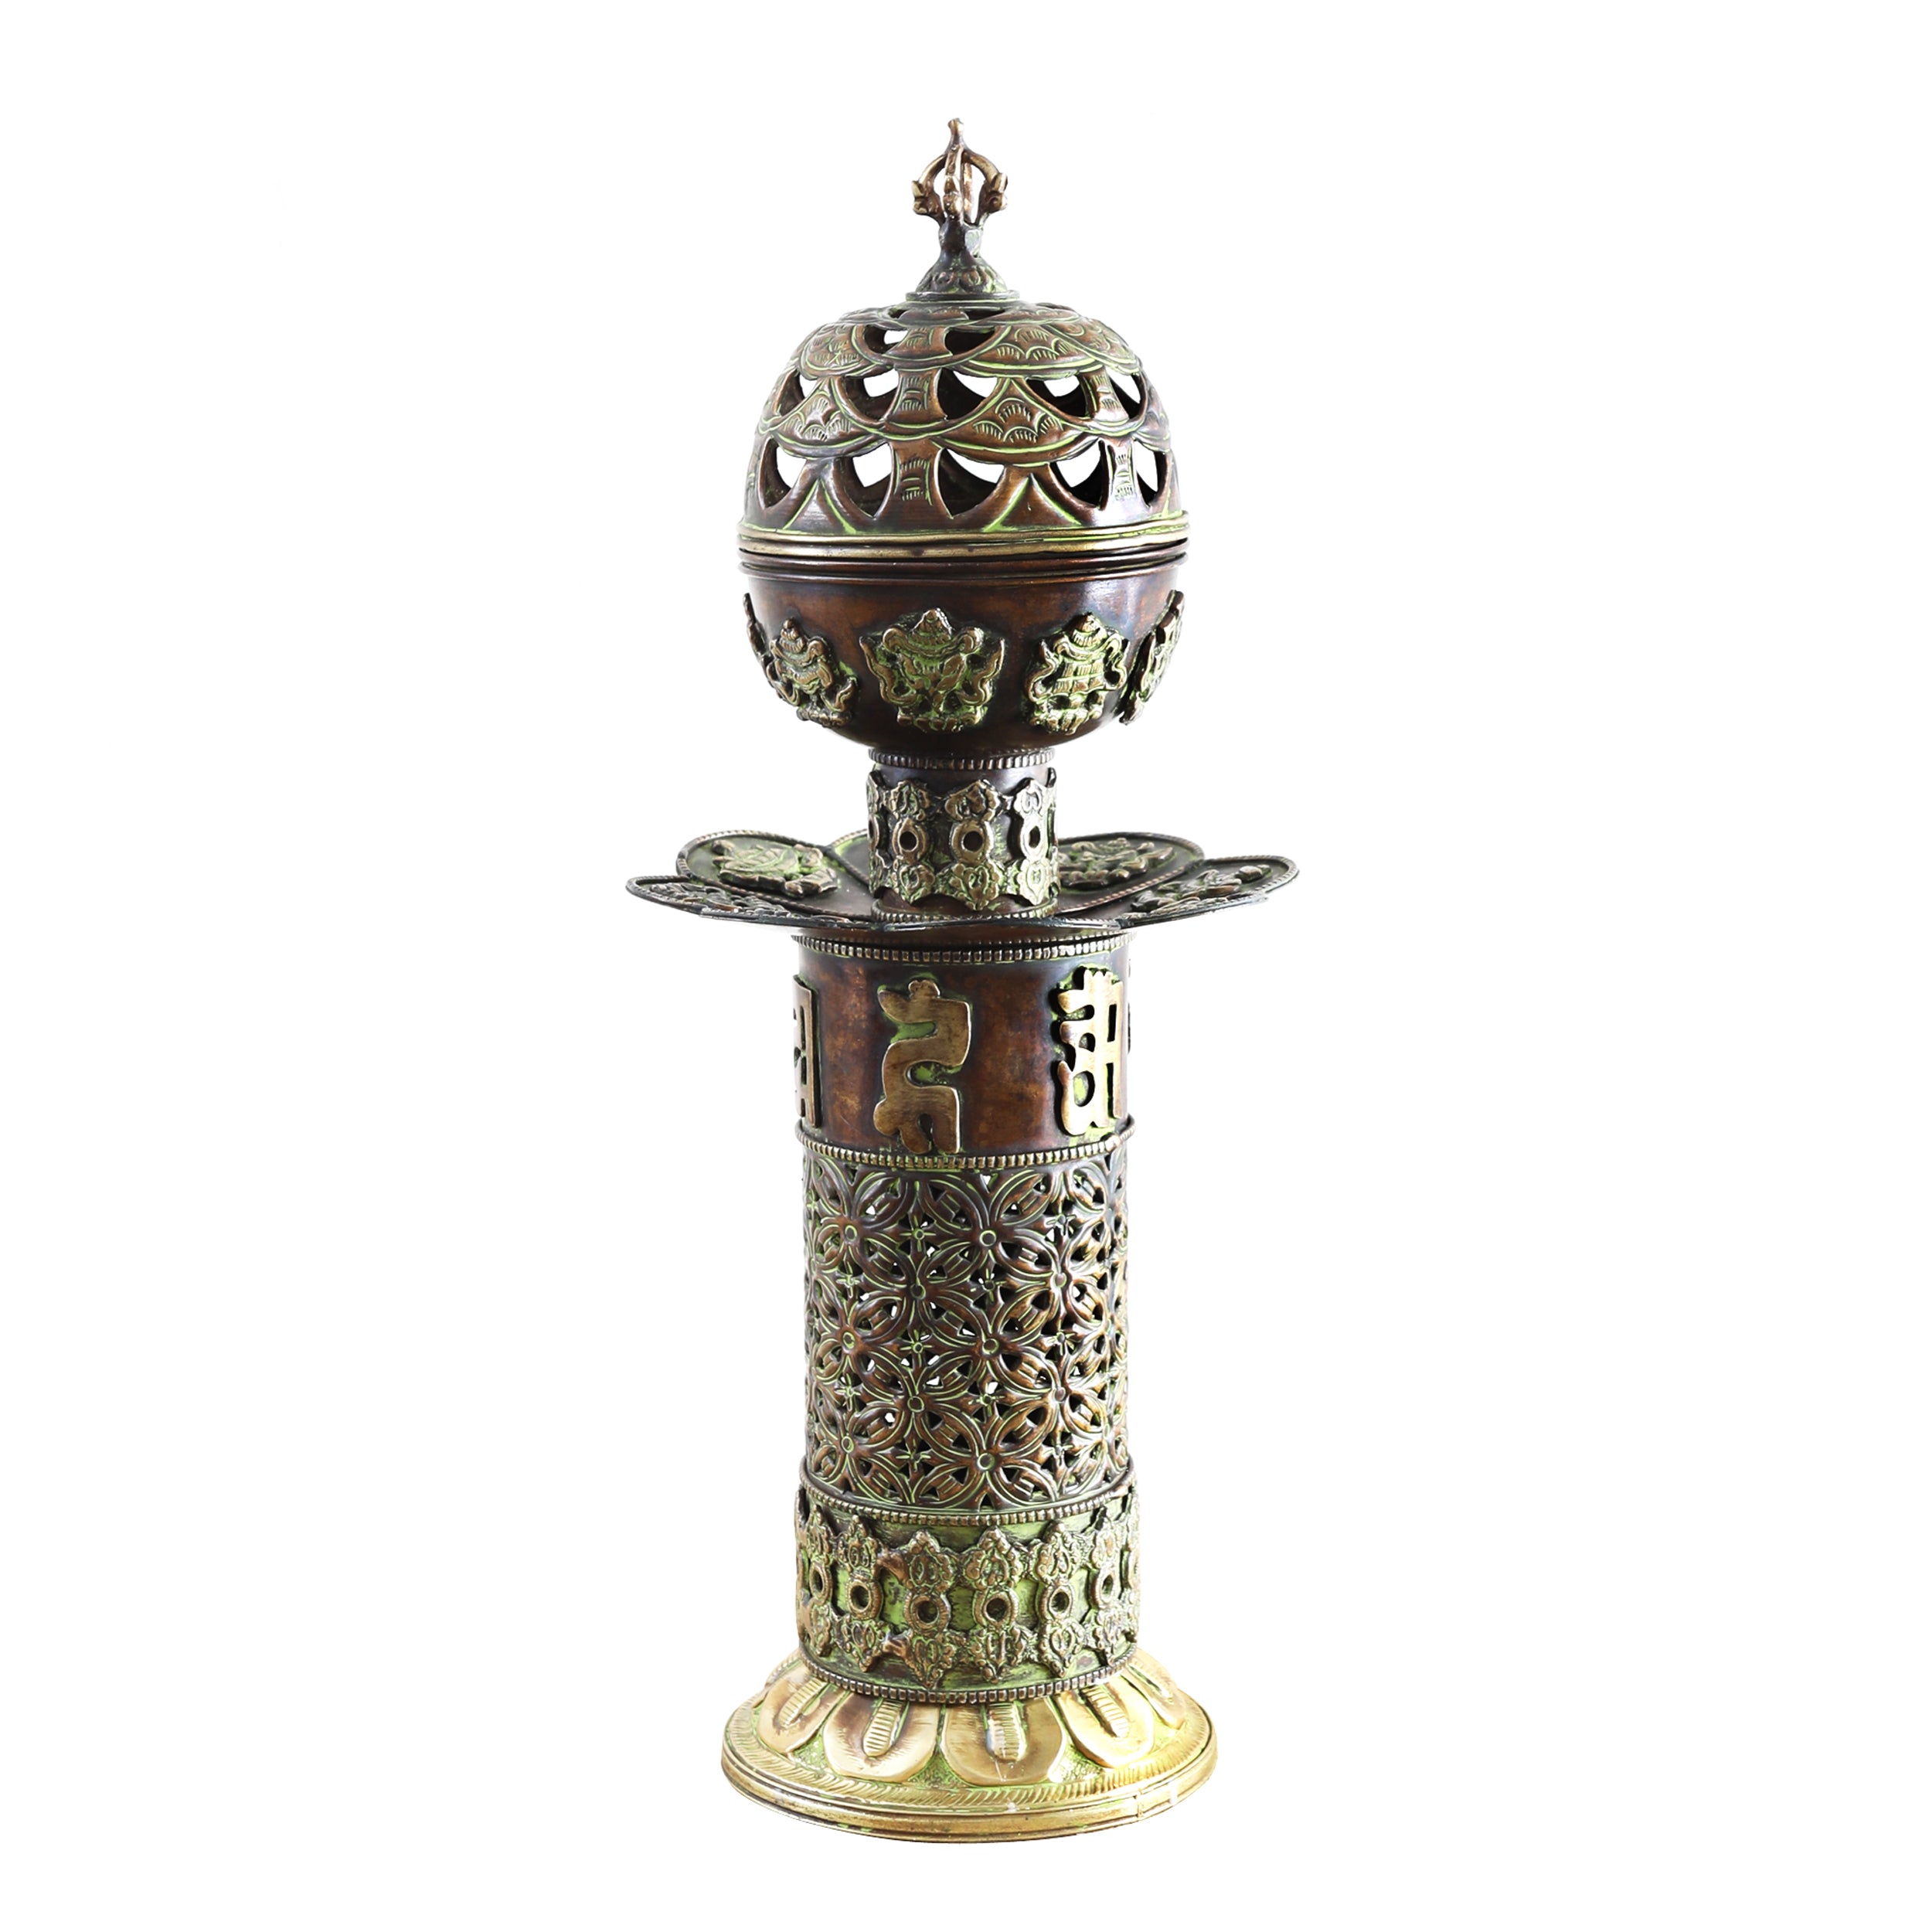 The Meshed Dome - Antique Incense/Candle Holder